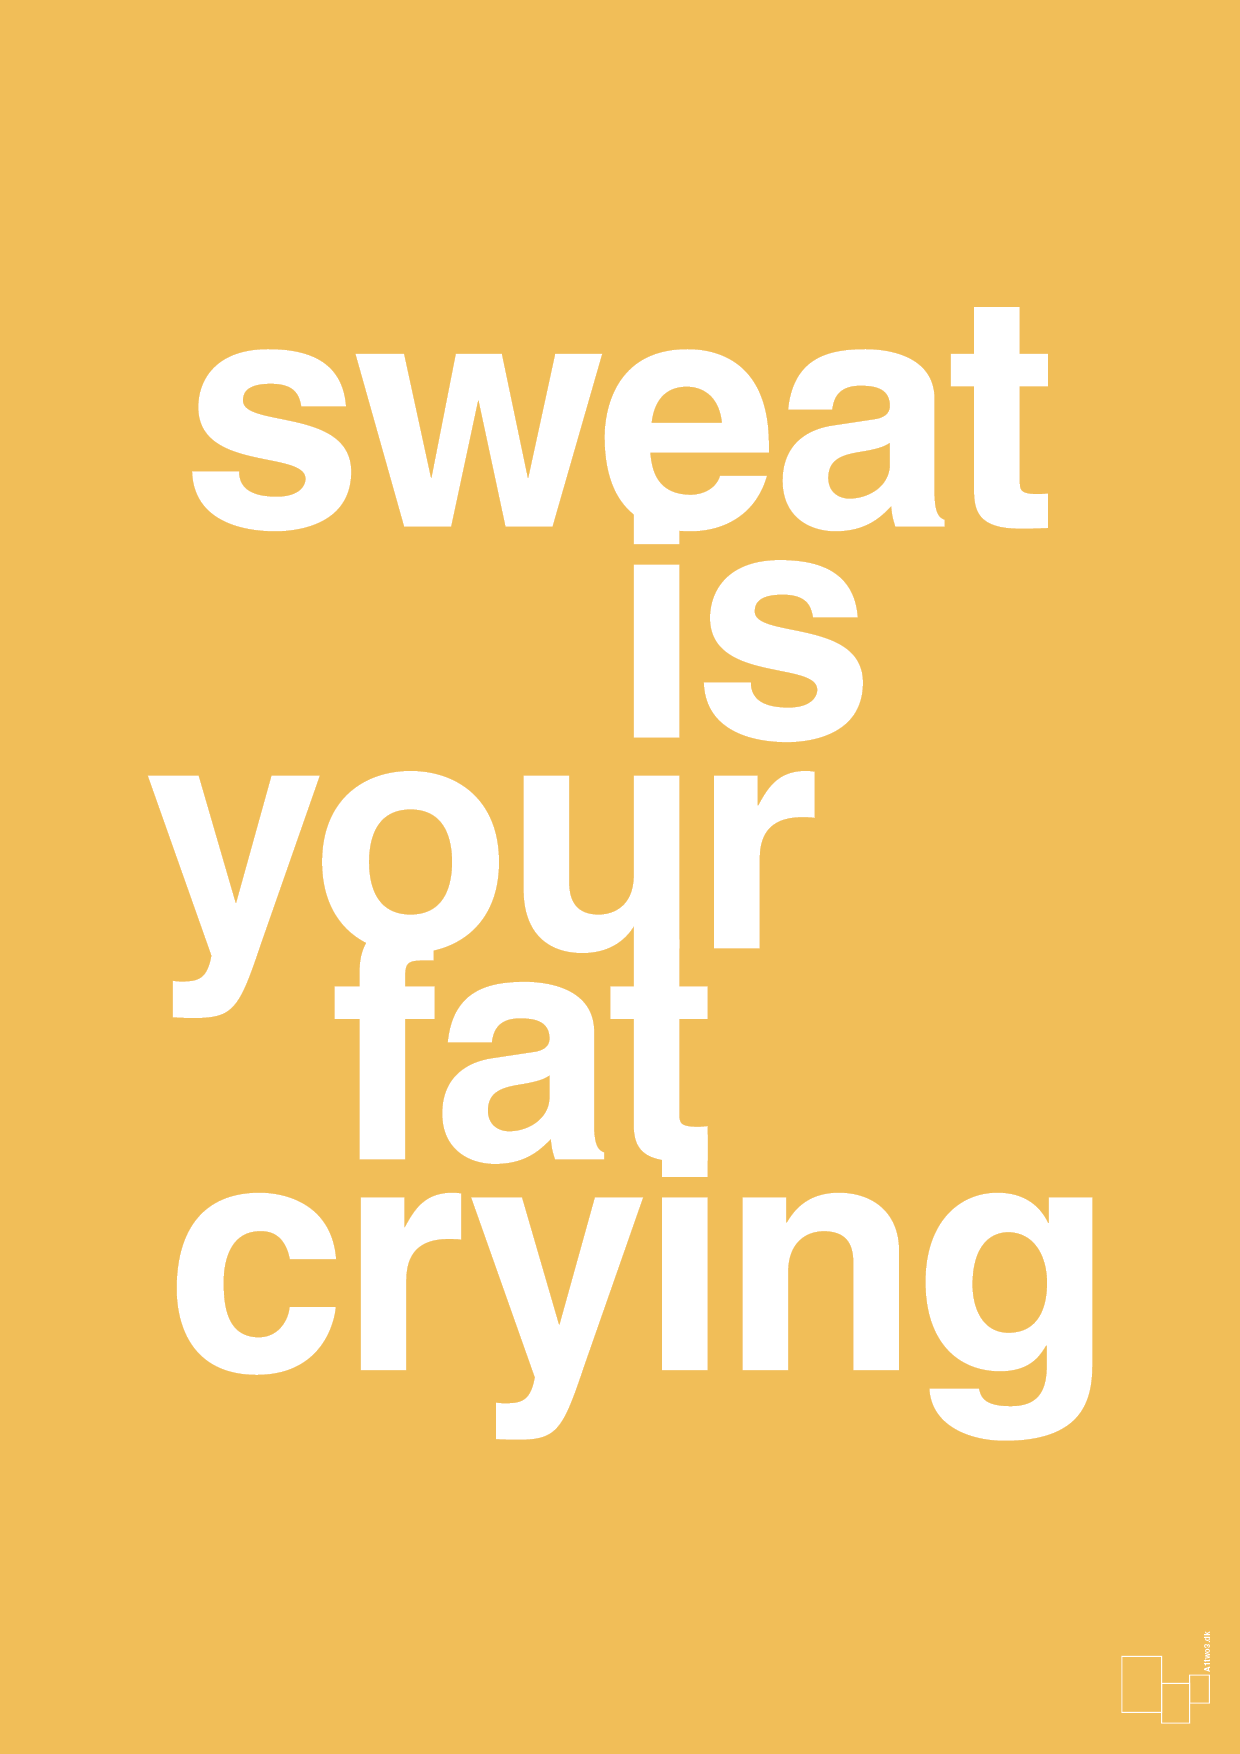 sweat is your fat crying - Plakat med Sport & Fritid i Honeycomb